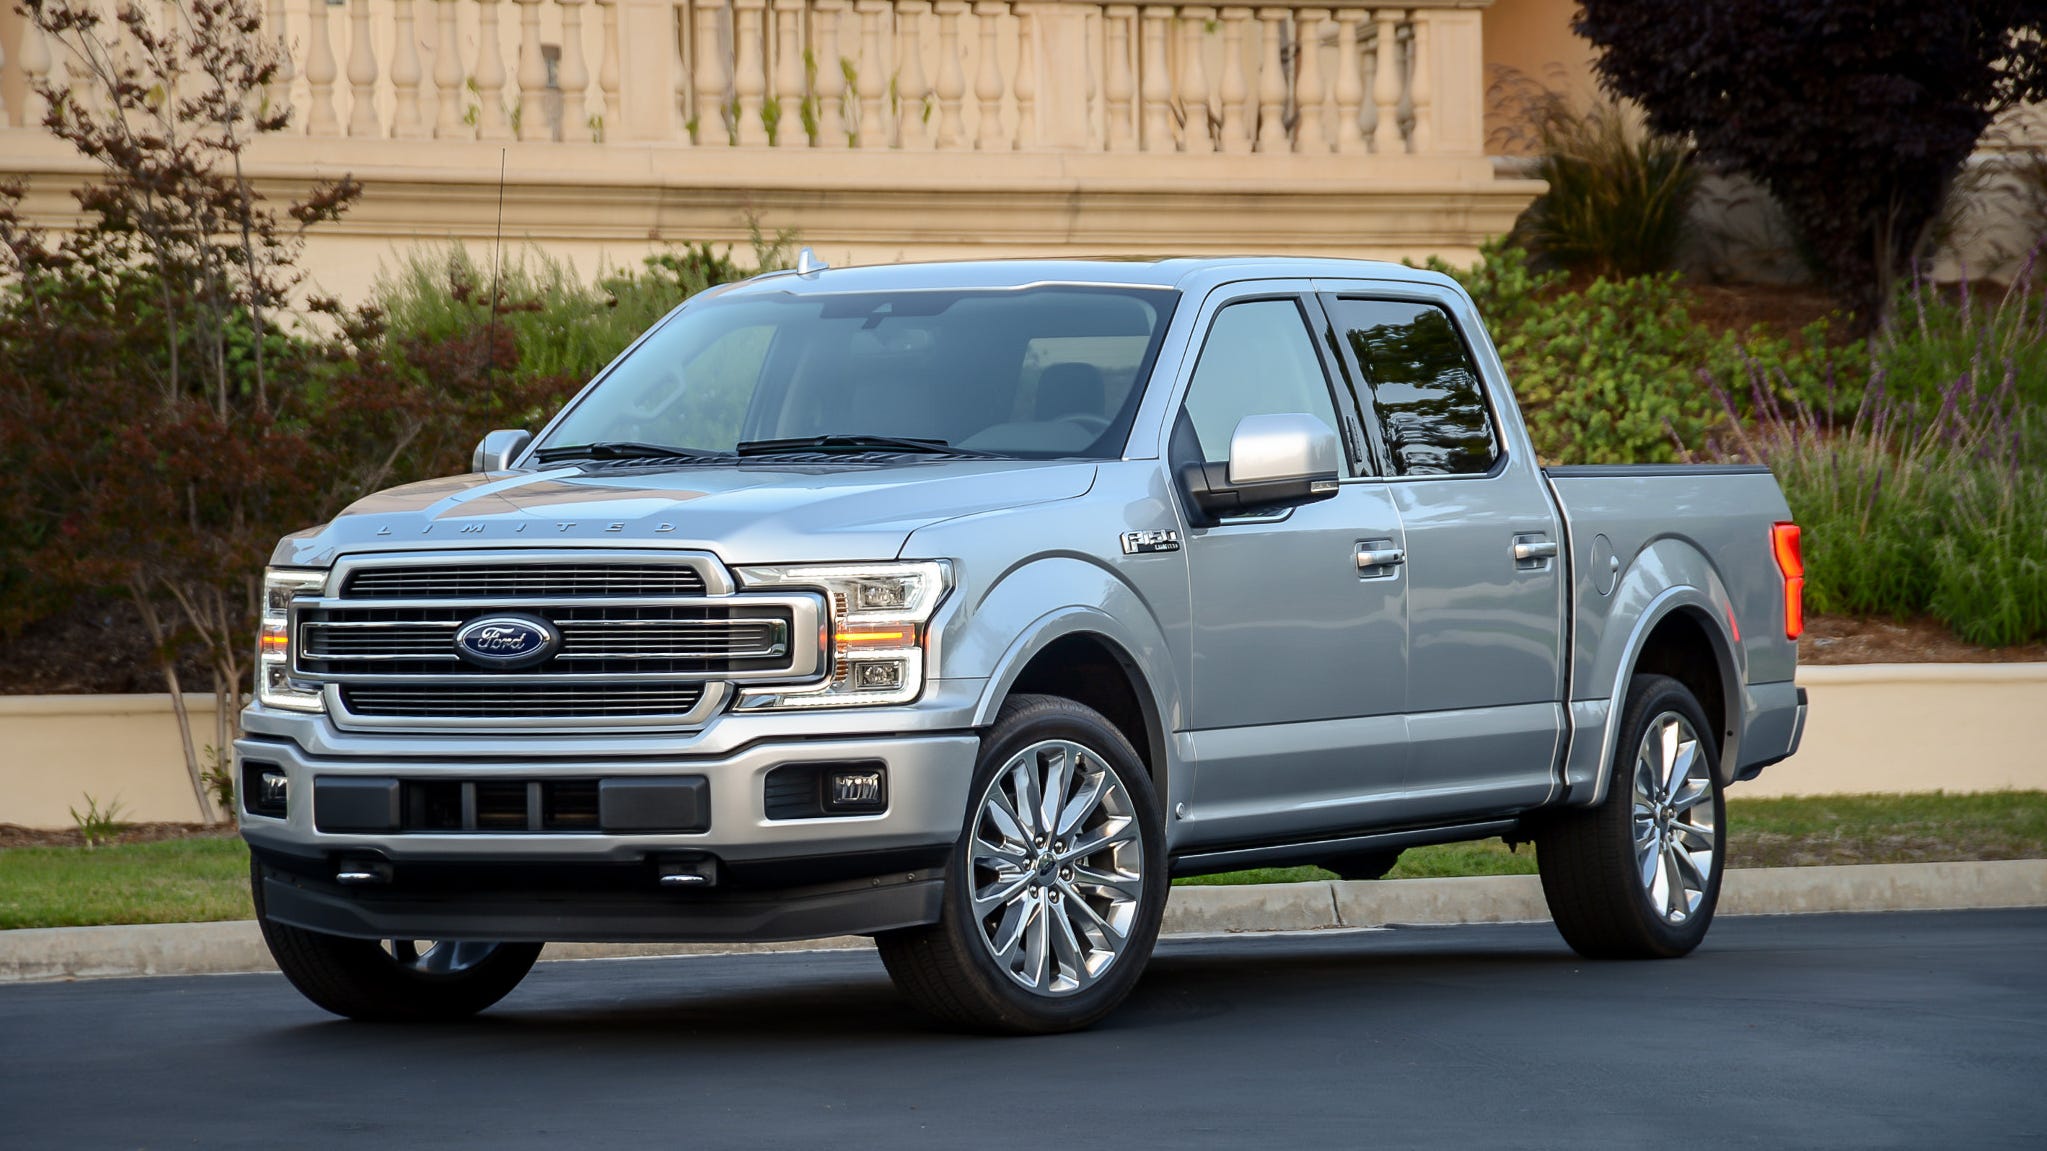 201920 Ford F150 recalled for possible steering, fire issue